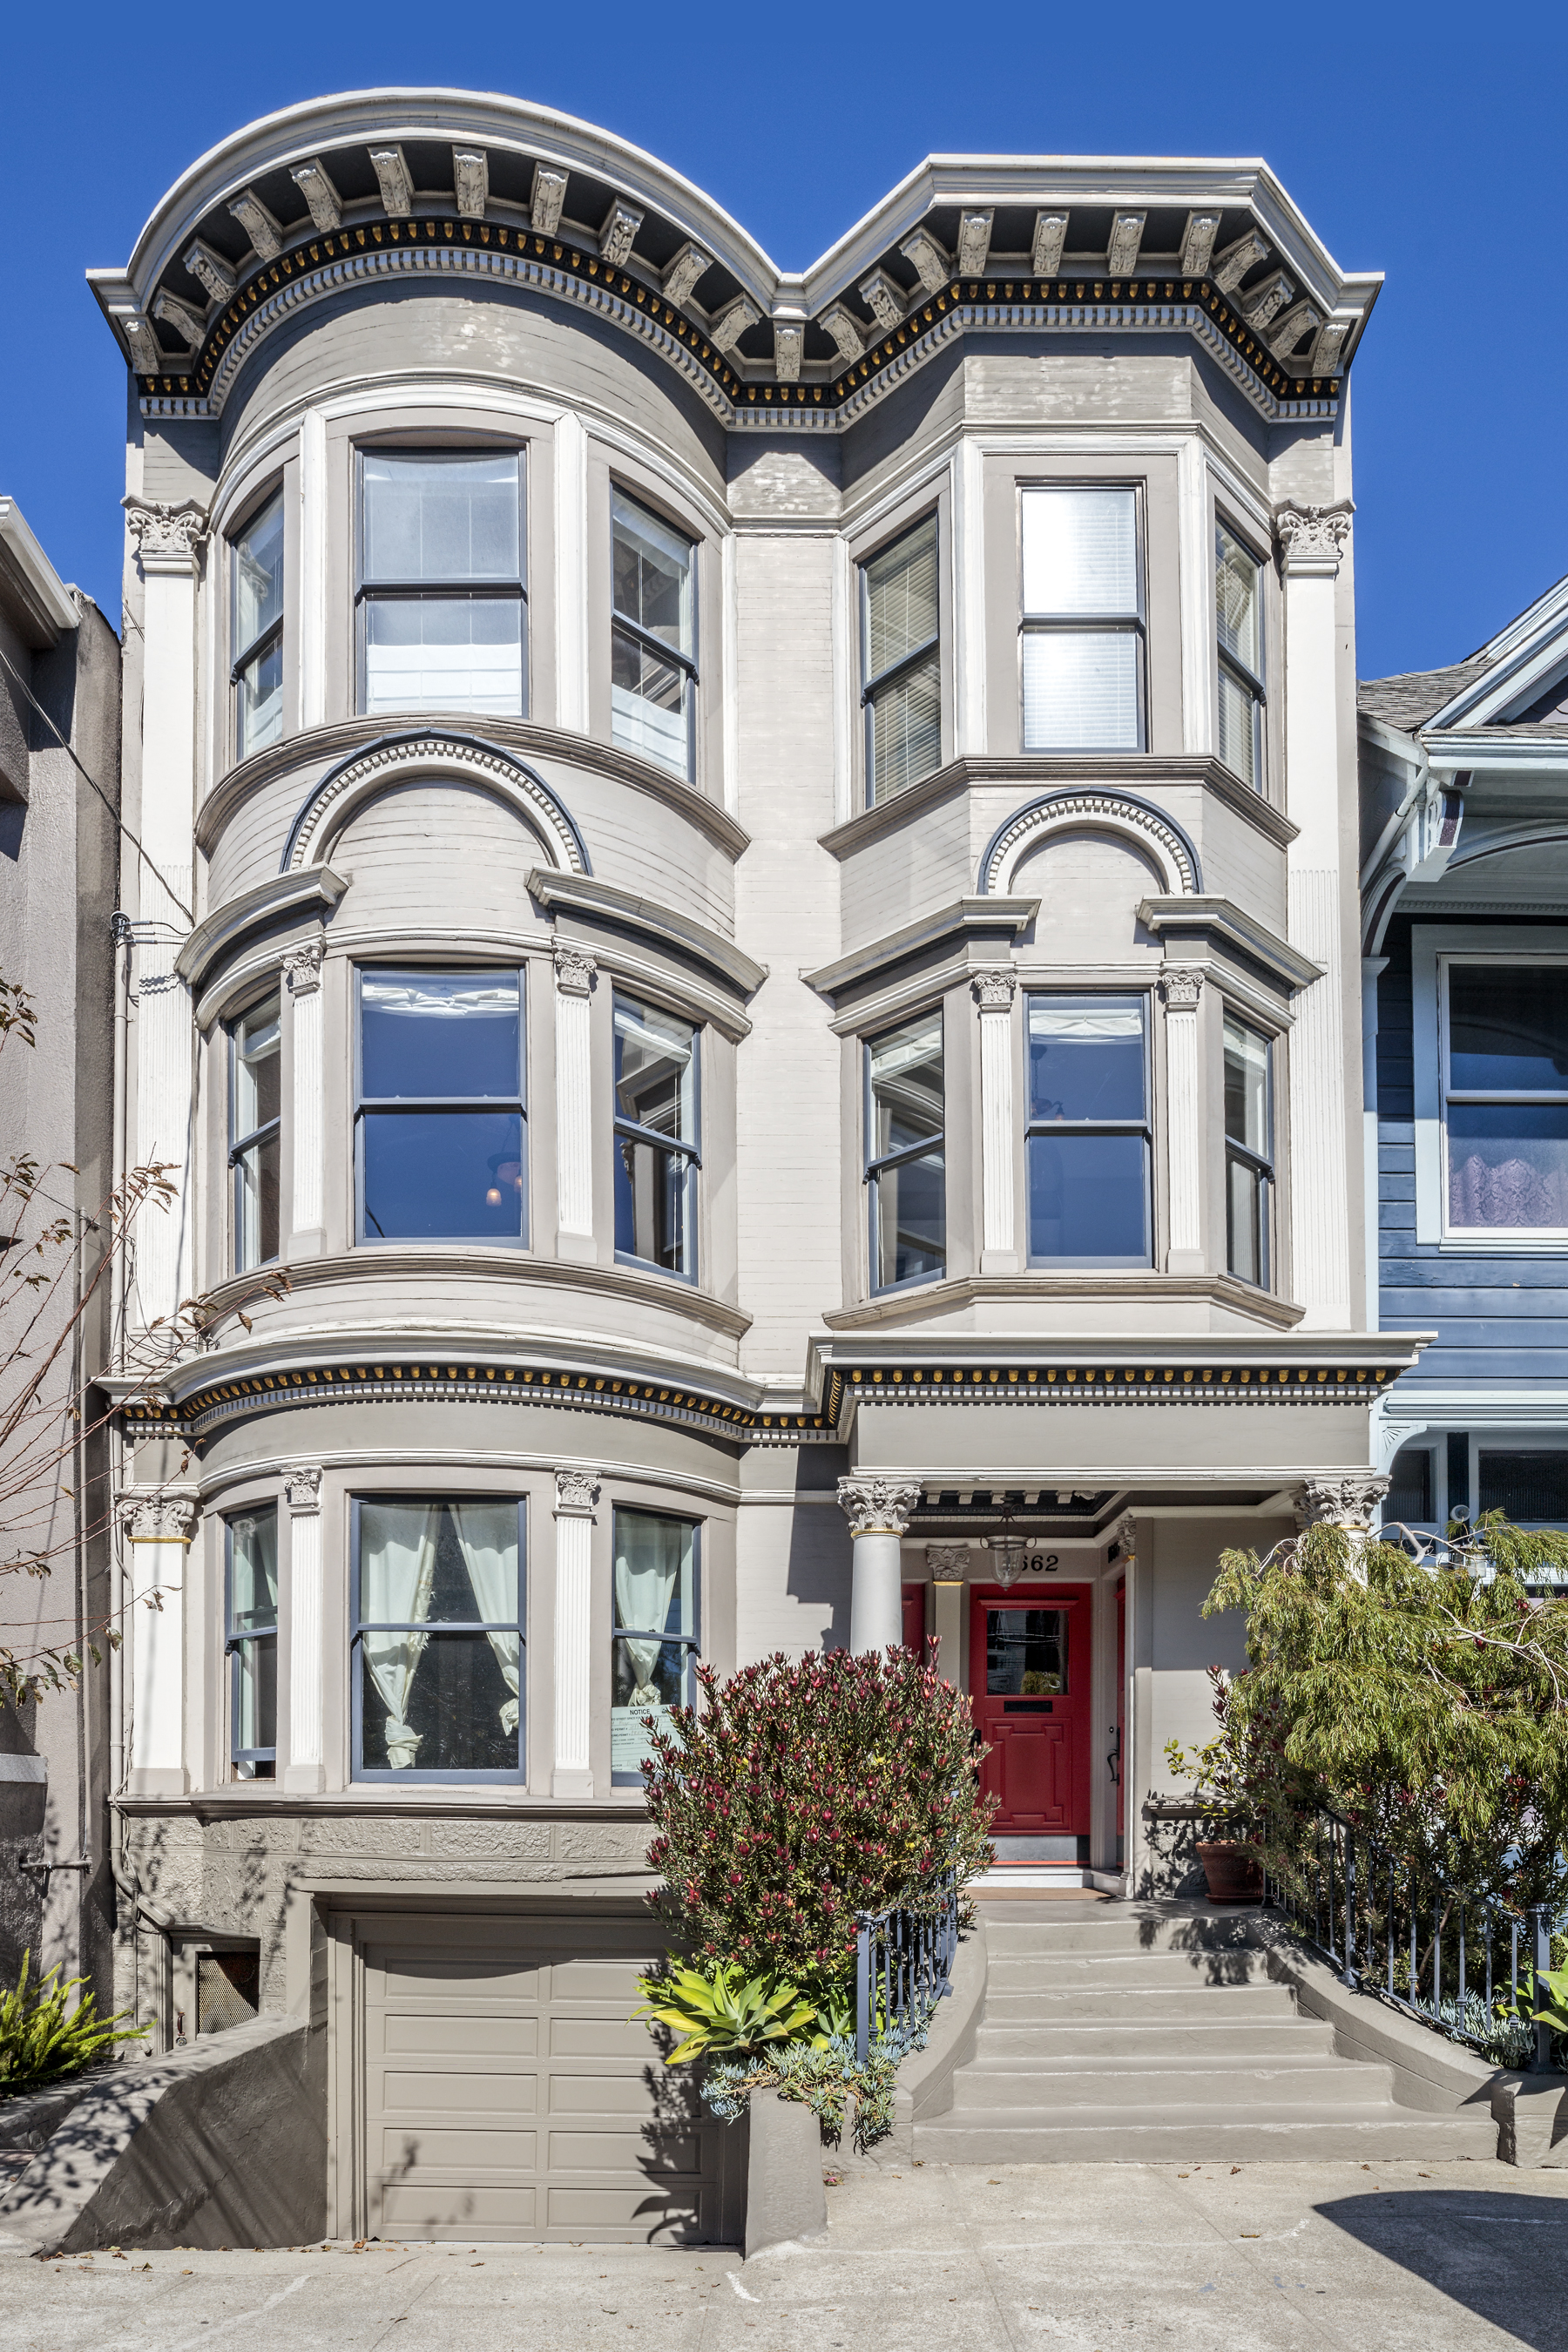 SOLD | 1662 Page St. | Haight Ashbury | $1,660,000